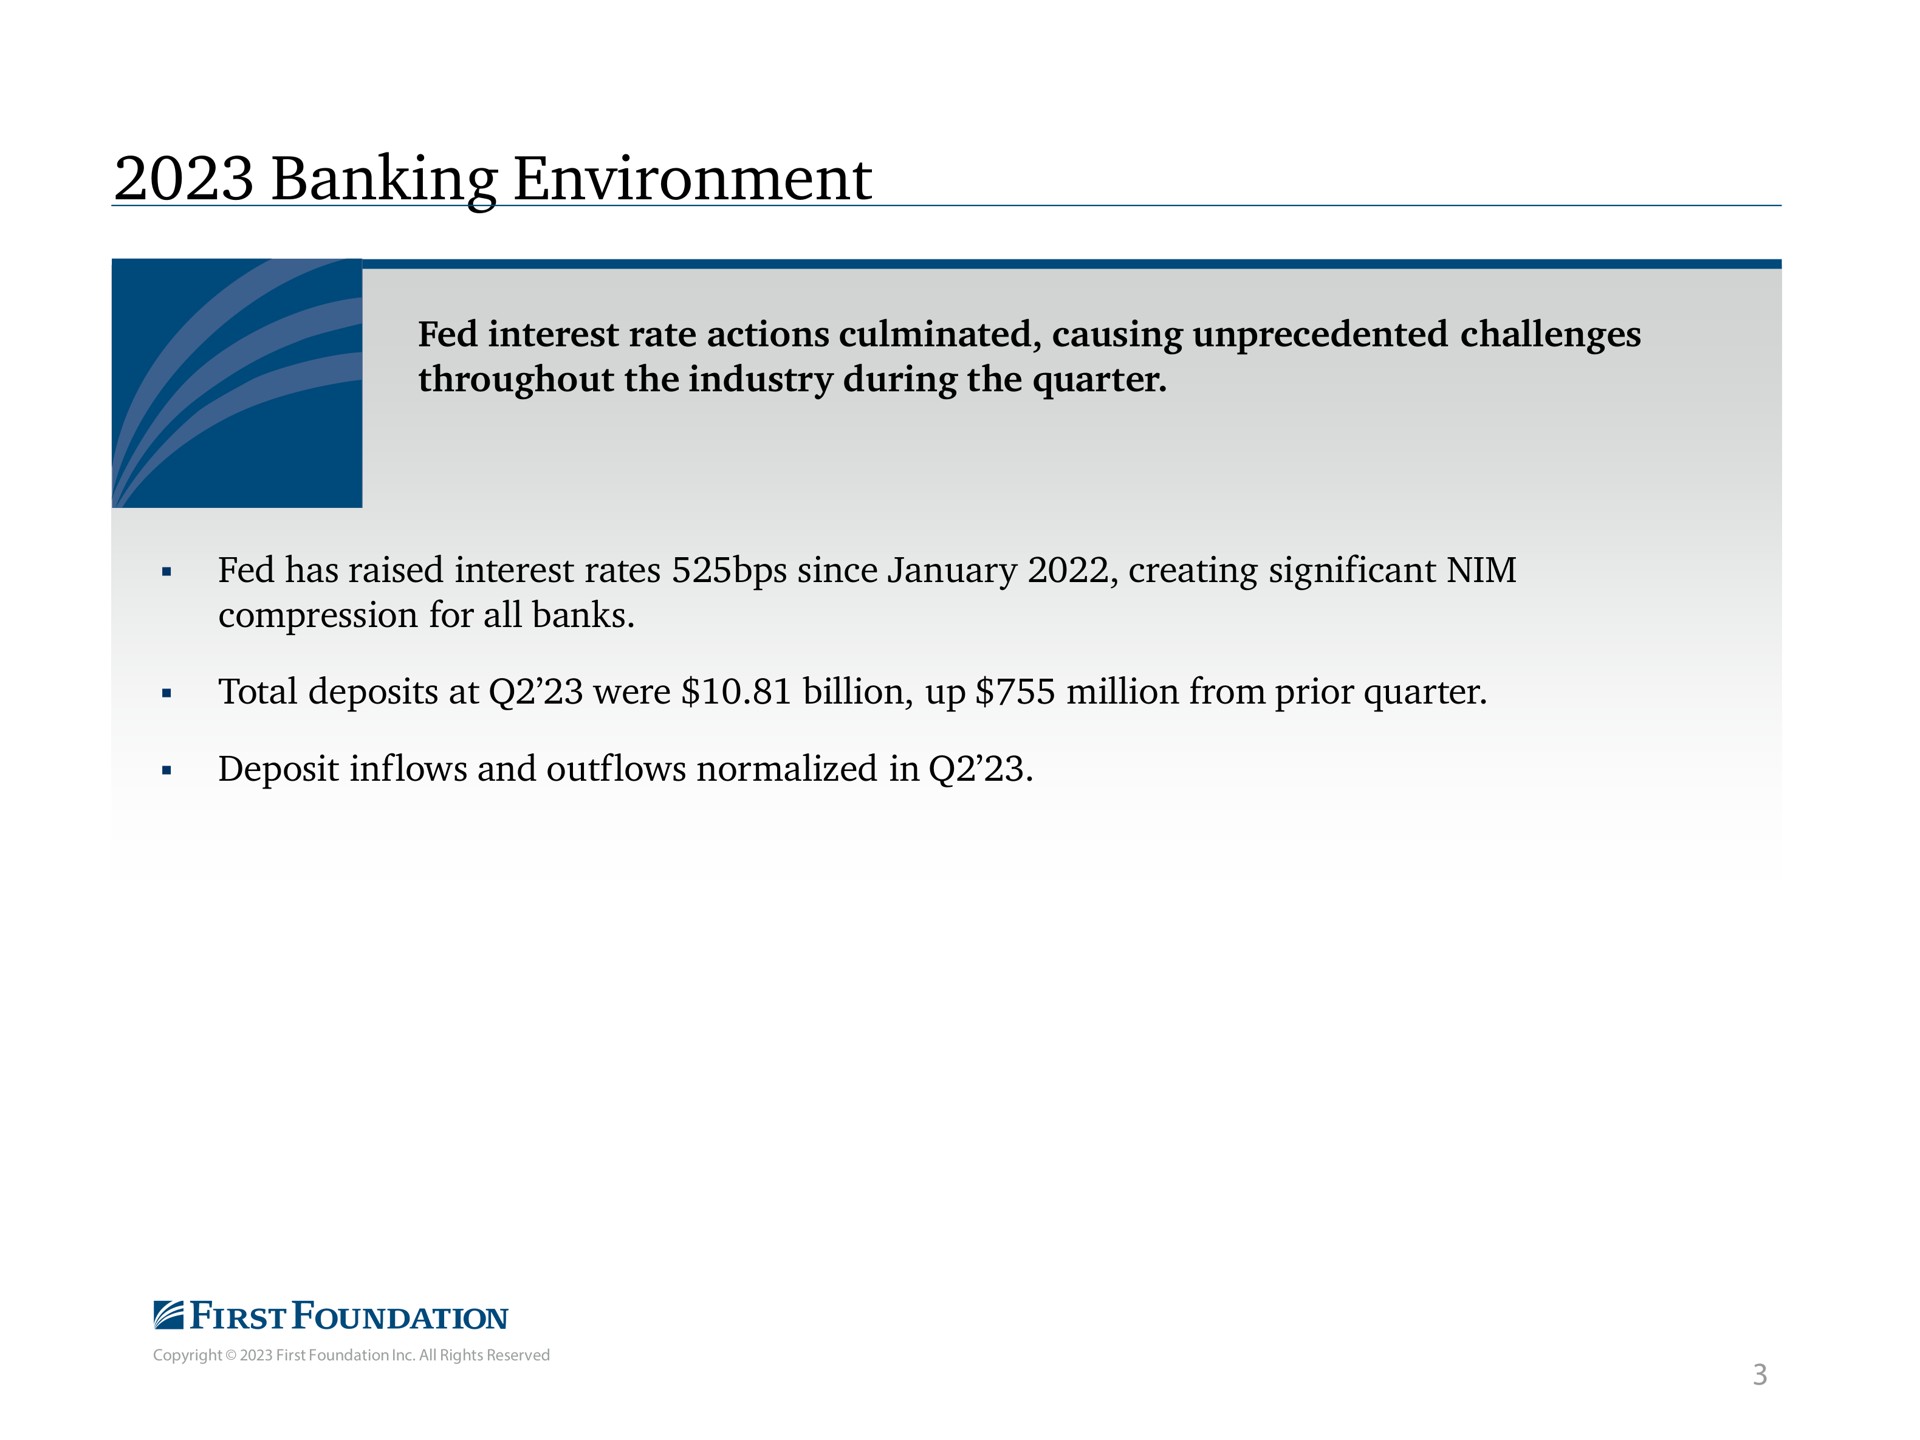 banking environment fed interest rate actions culminated causing unprecedented challenges throughout the industry during the quarter fed has raised interest rates since creating significant nim compression for all banks total deposits at were billion up million from prior quarter deposit inflows and outflows normalized in | First Foundation